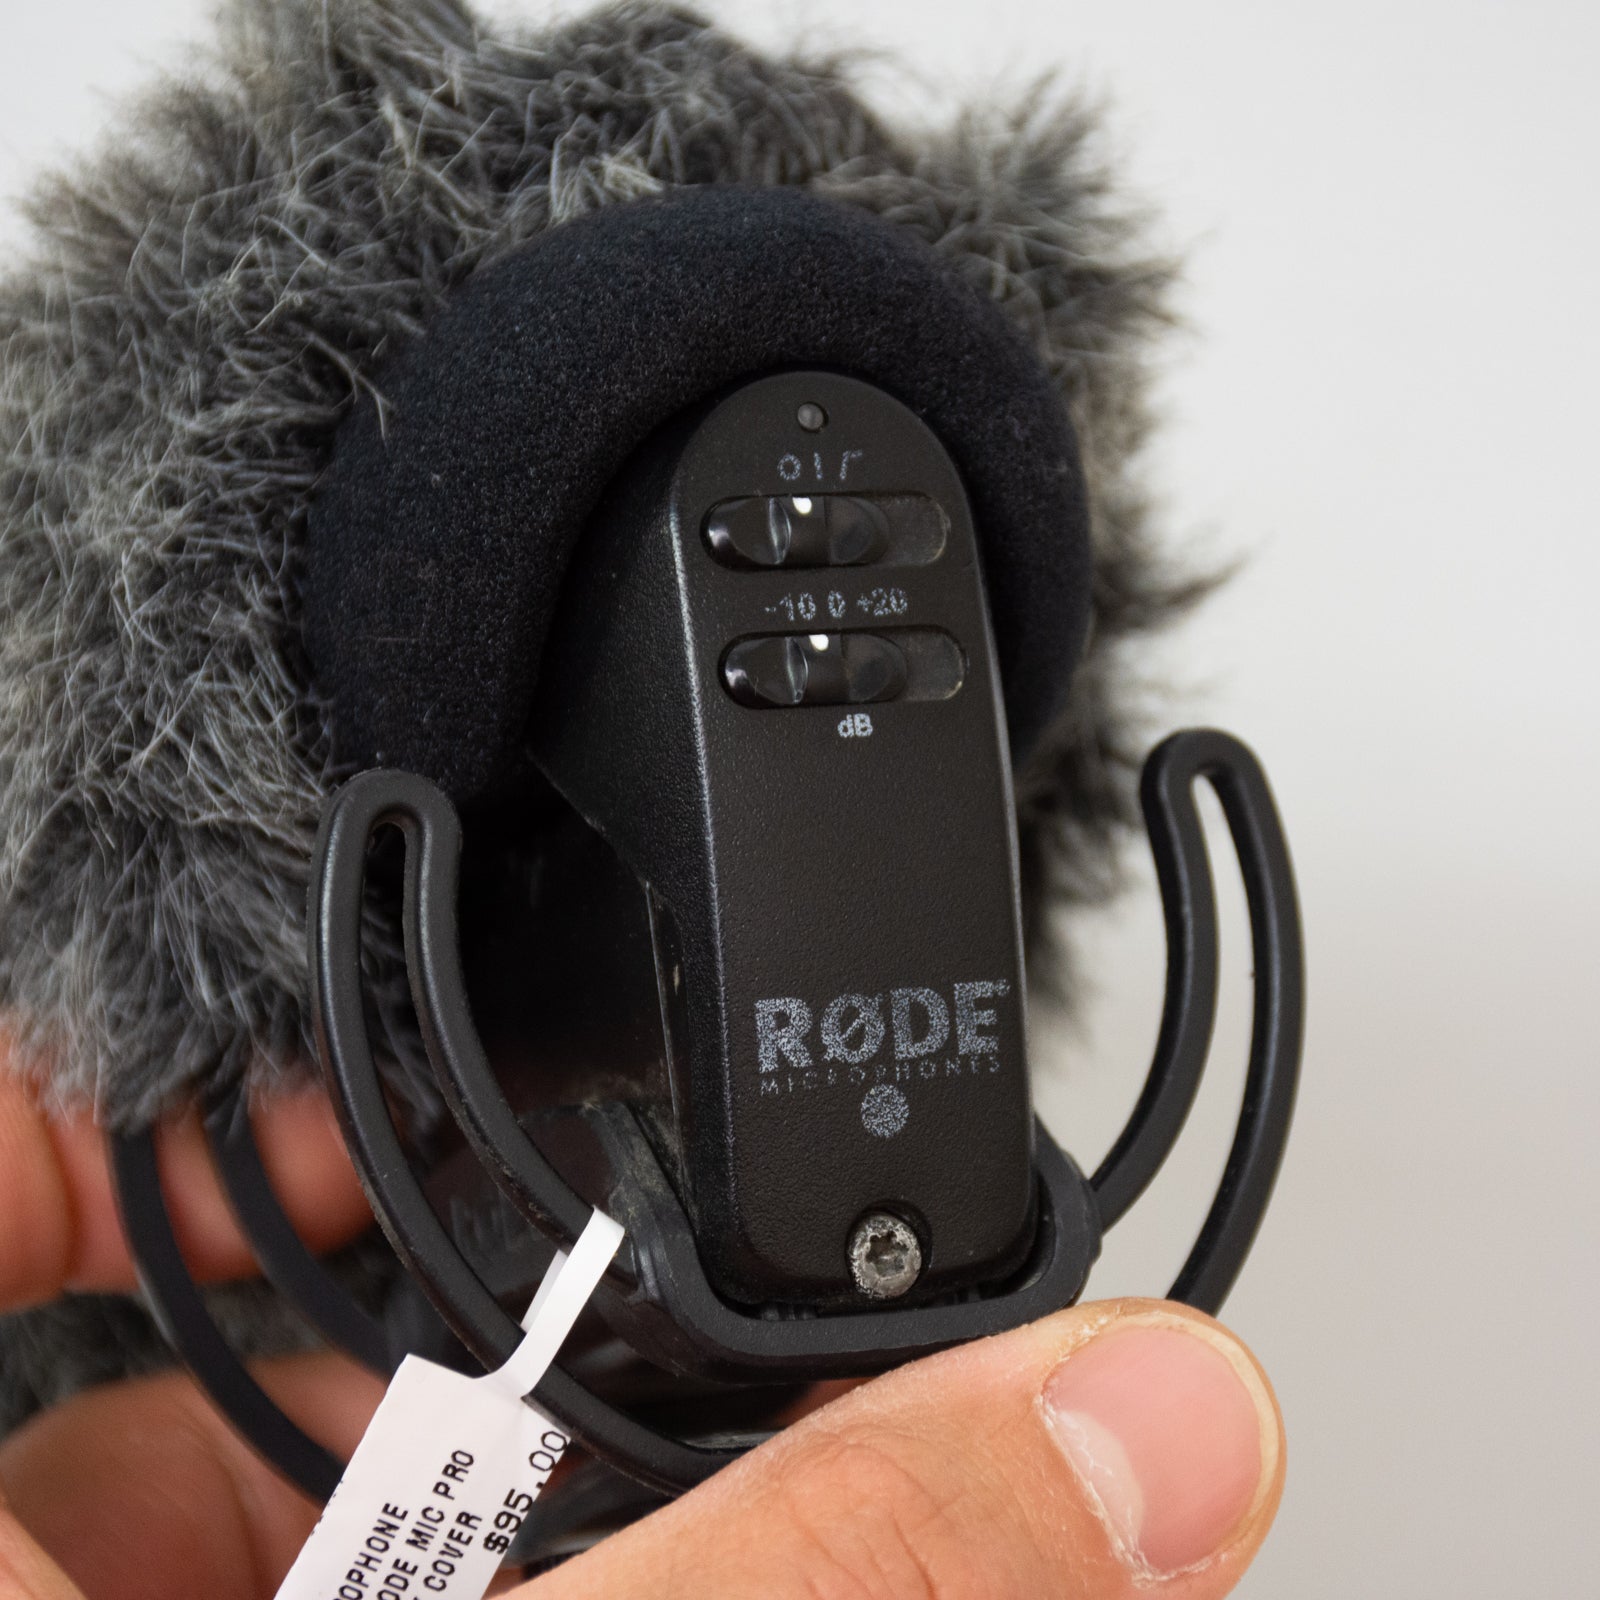 Rode Mic Pro - Shot Mic with Fox Cover